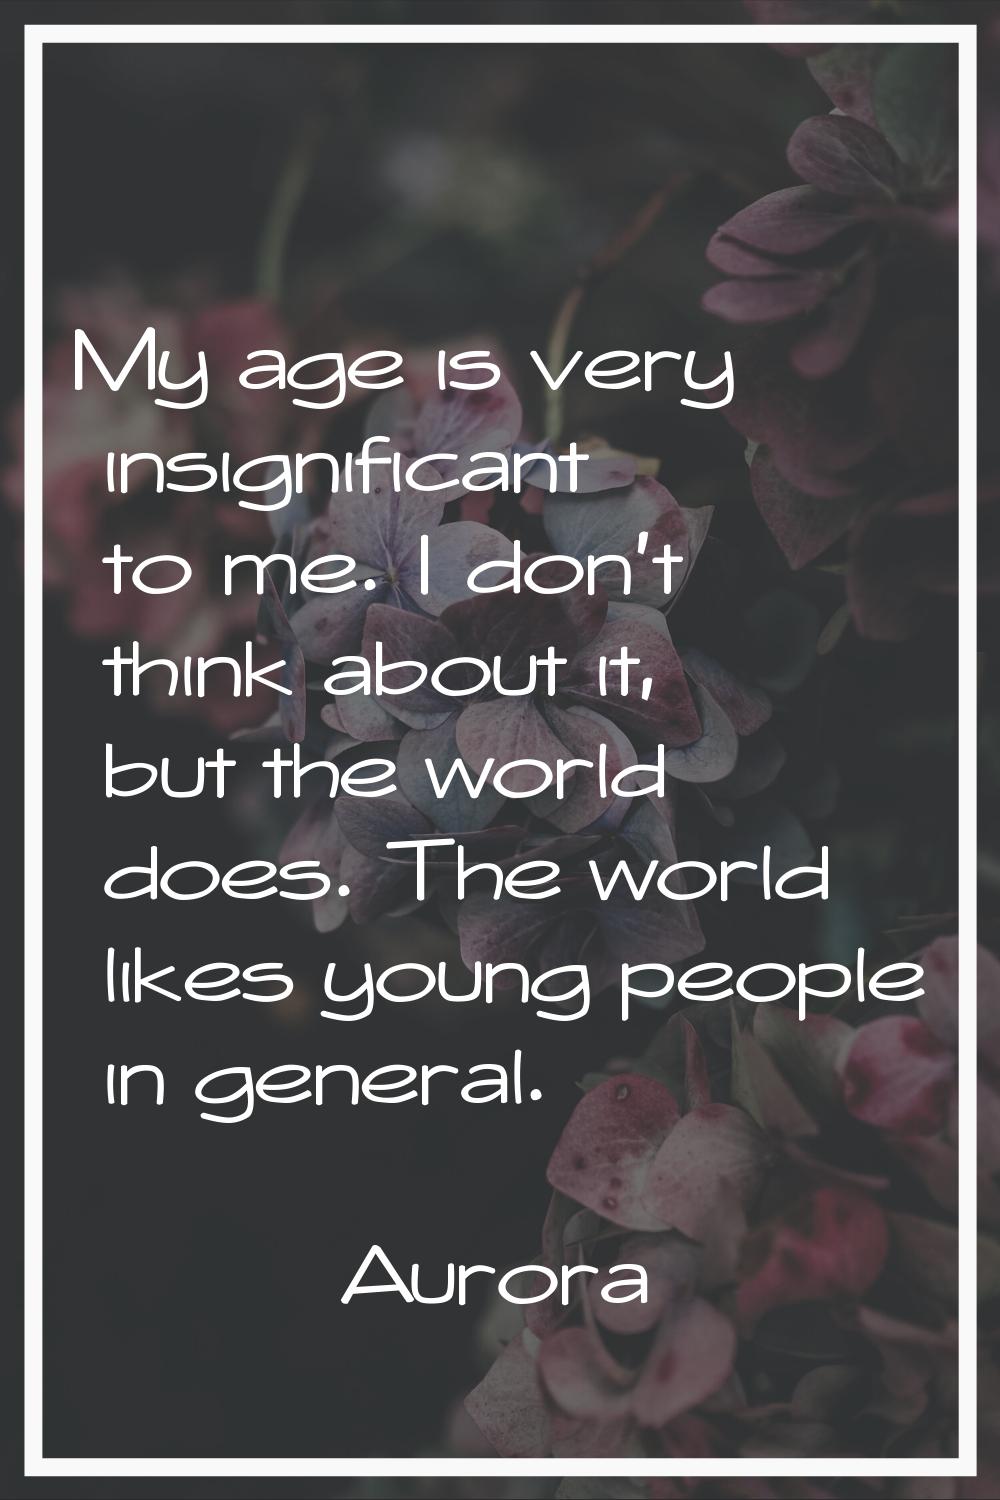 My age is very insignificant to me. I don't think about it, but the world does. The world likes you